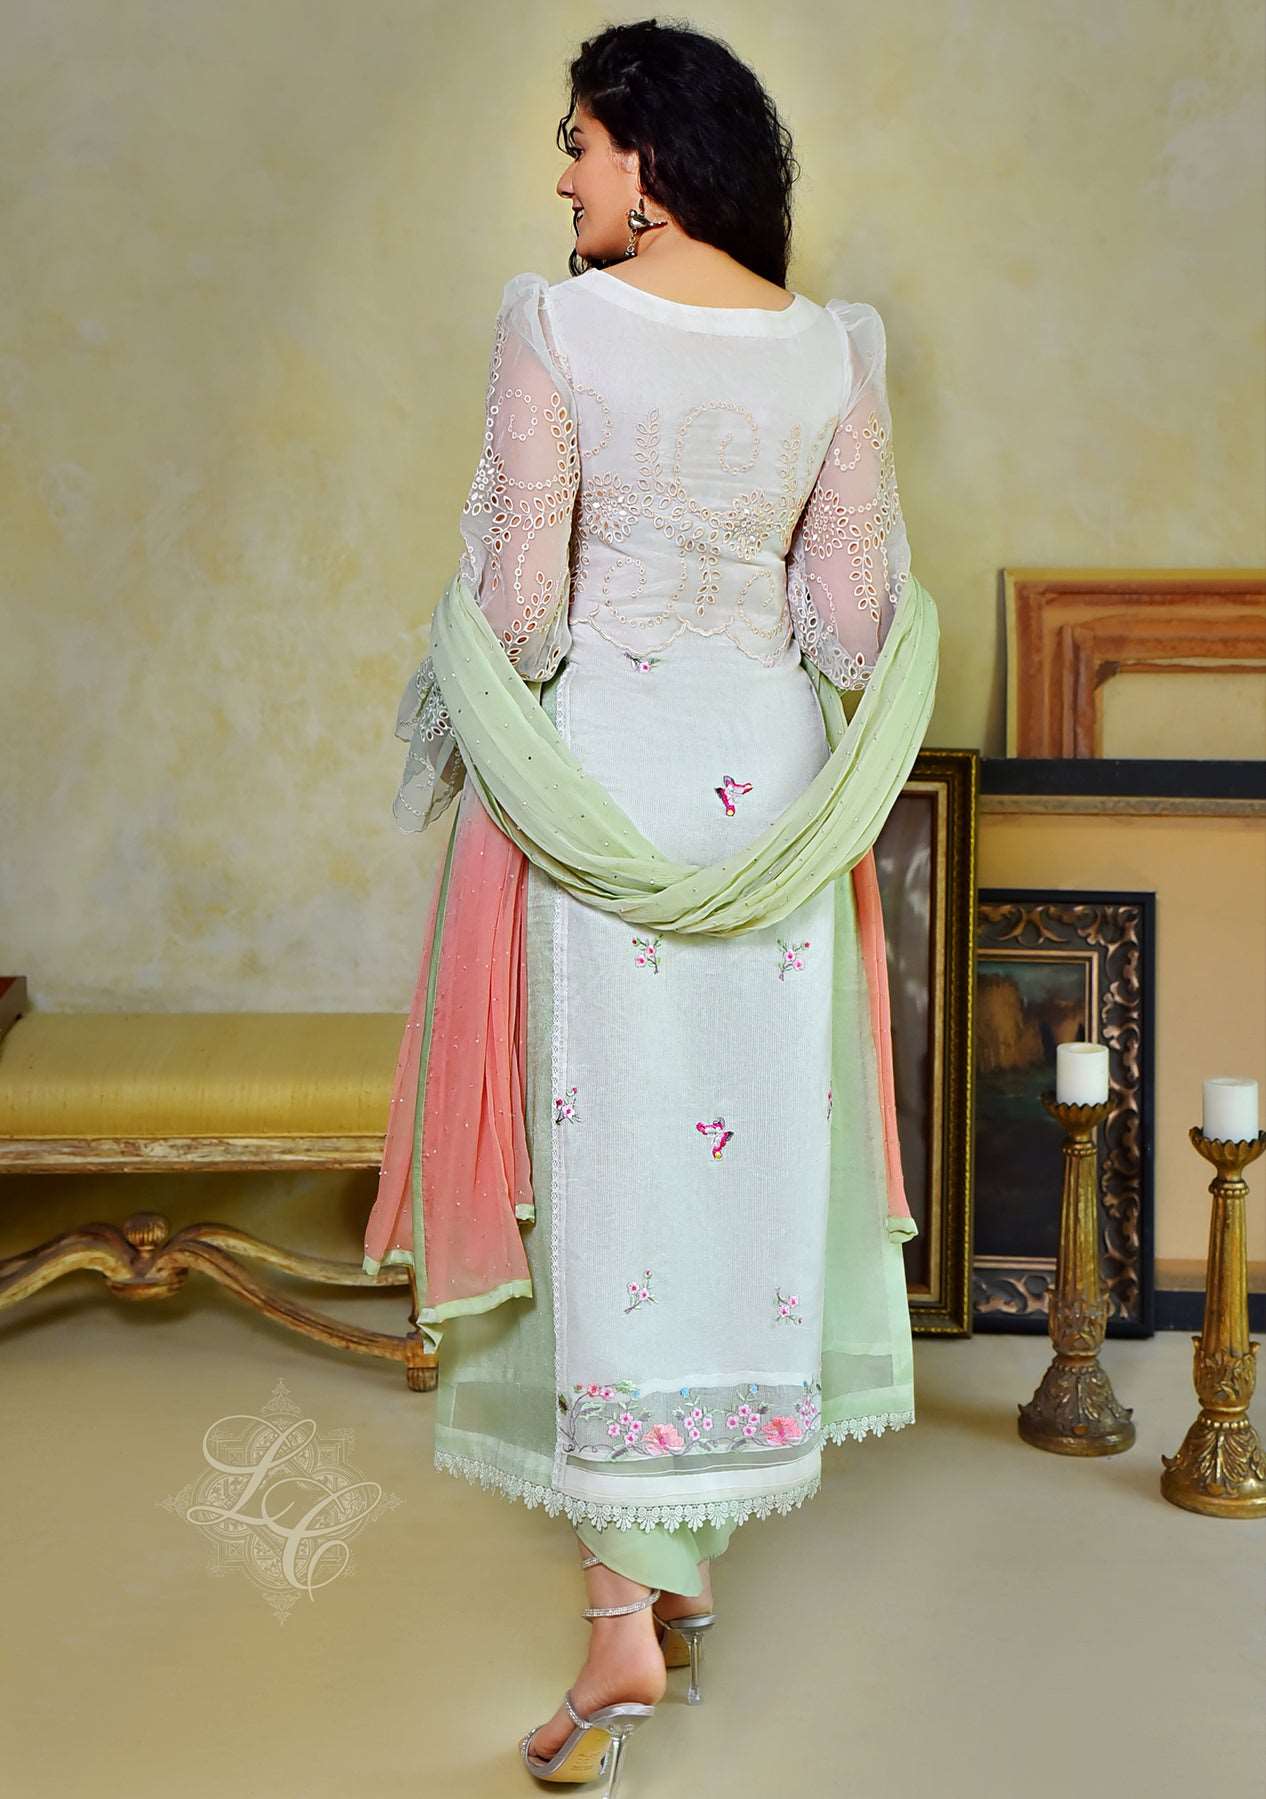 Off white and green kalidar with a tulip shalwar and chiffon dupatta